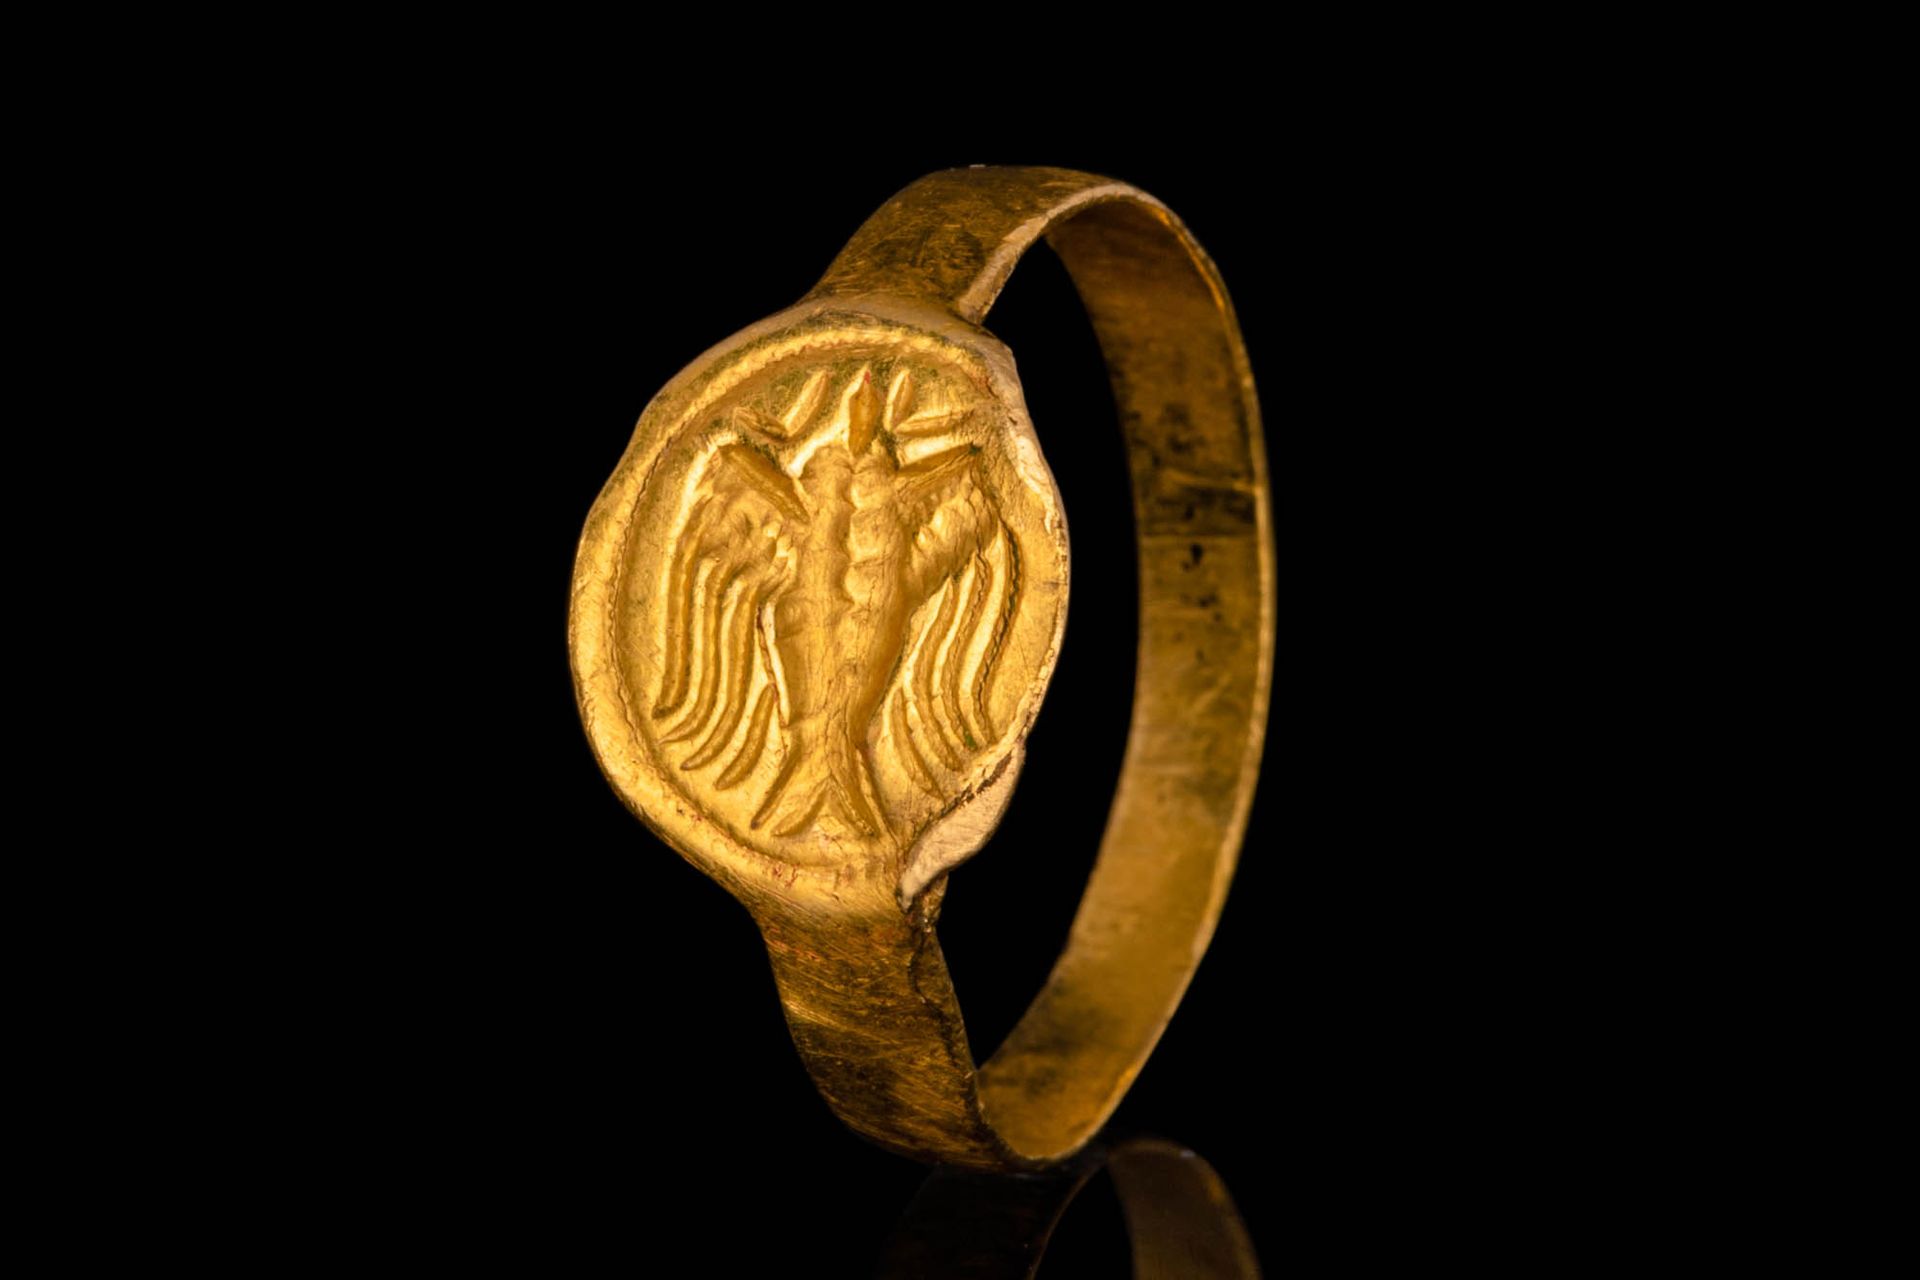 GREEK HELLENISTIC GOLD RING WITH BIRD WITH SPREAD WINGS Ca. 300 - 100 A.C.
Anell&hellip;